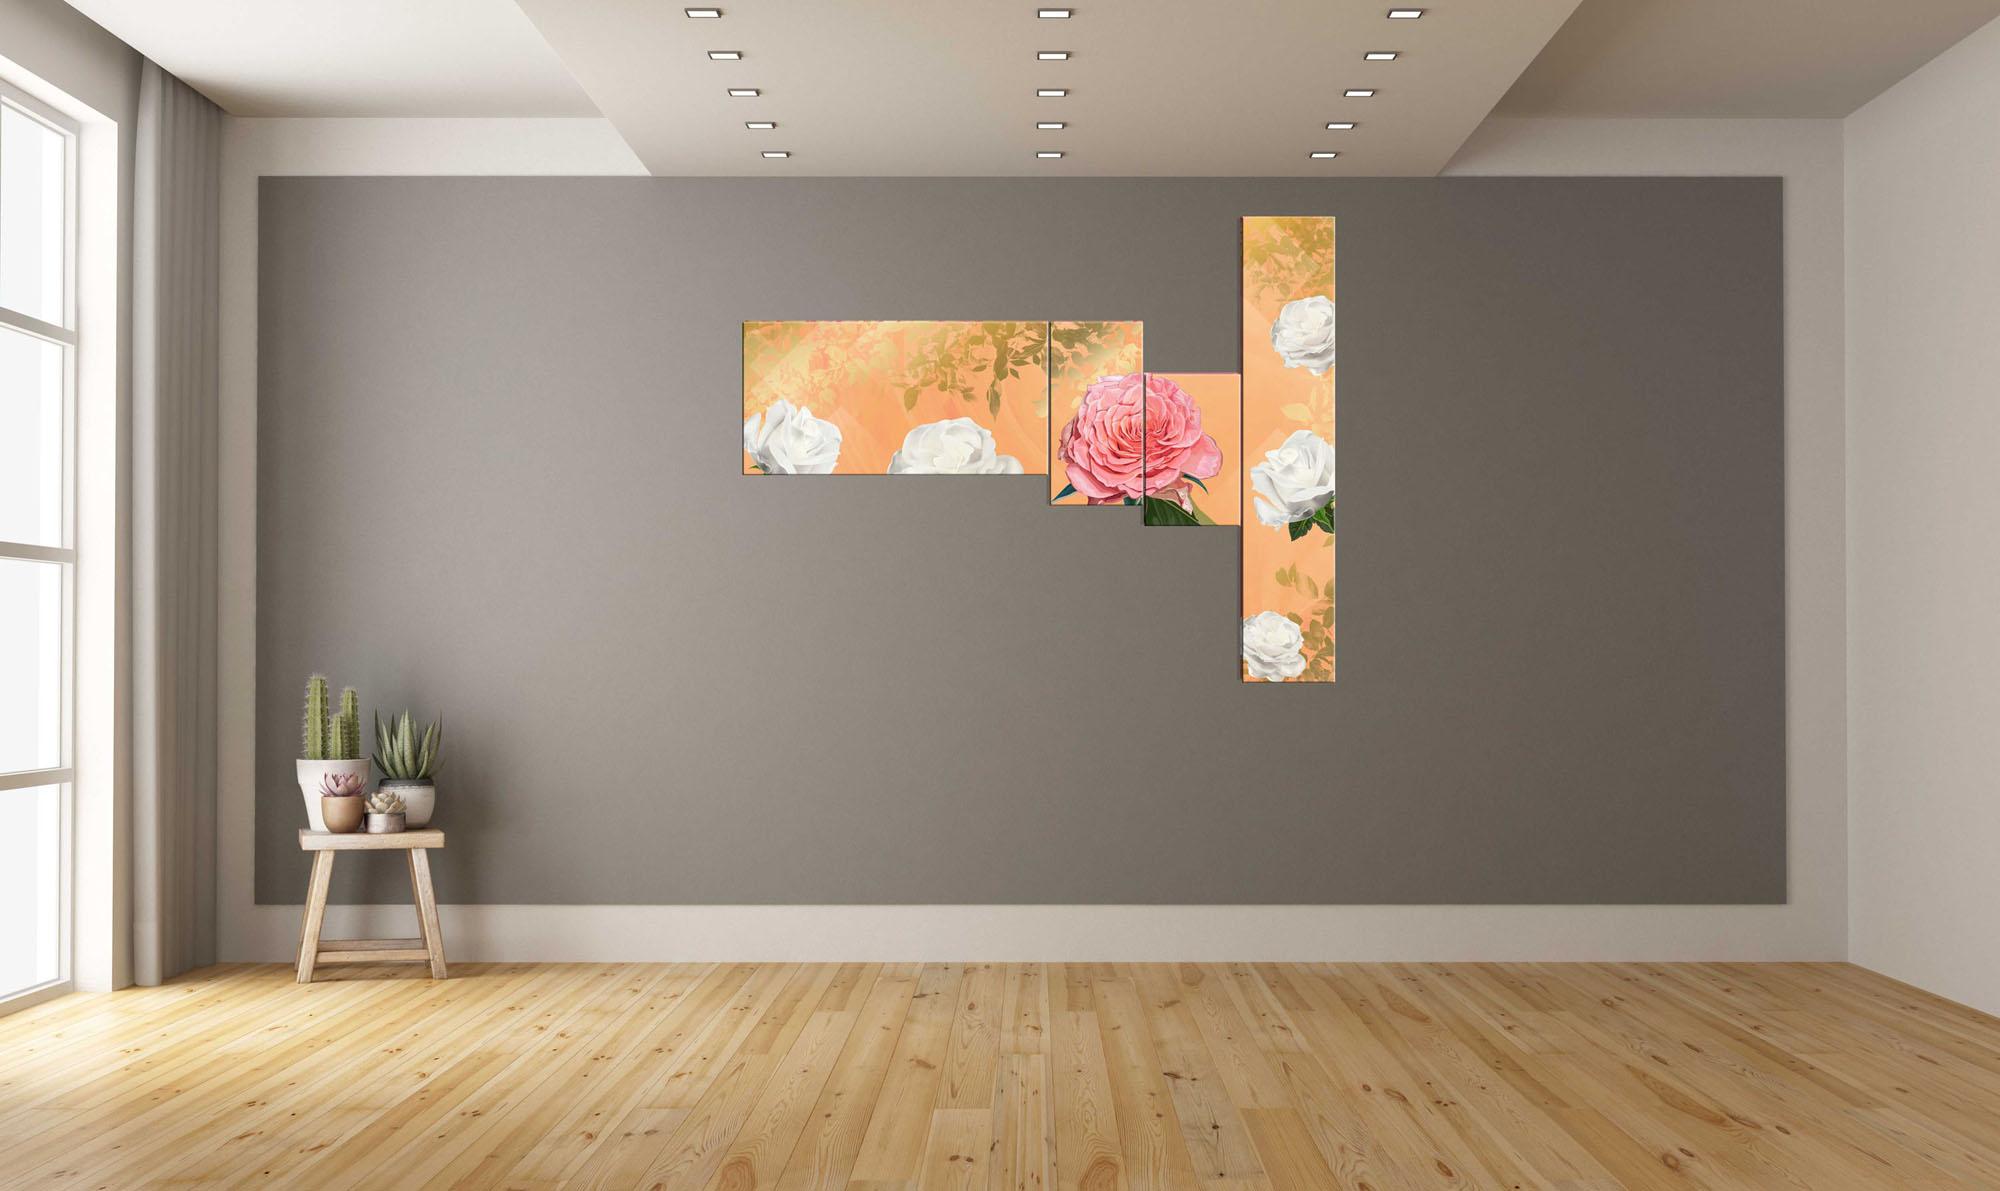 Modular picture - blooming roses on an orange background